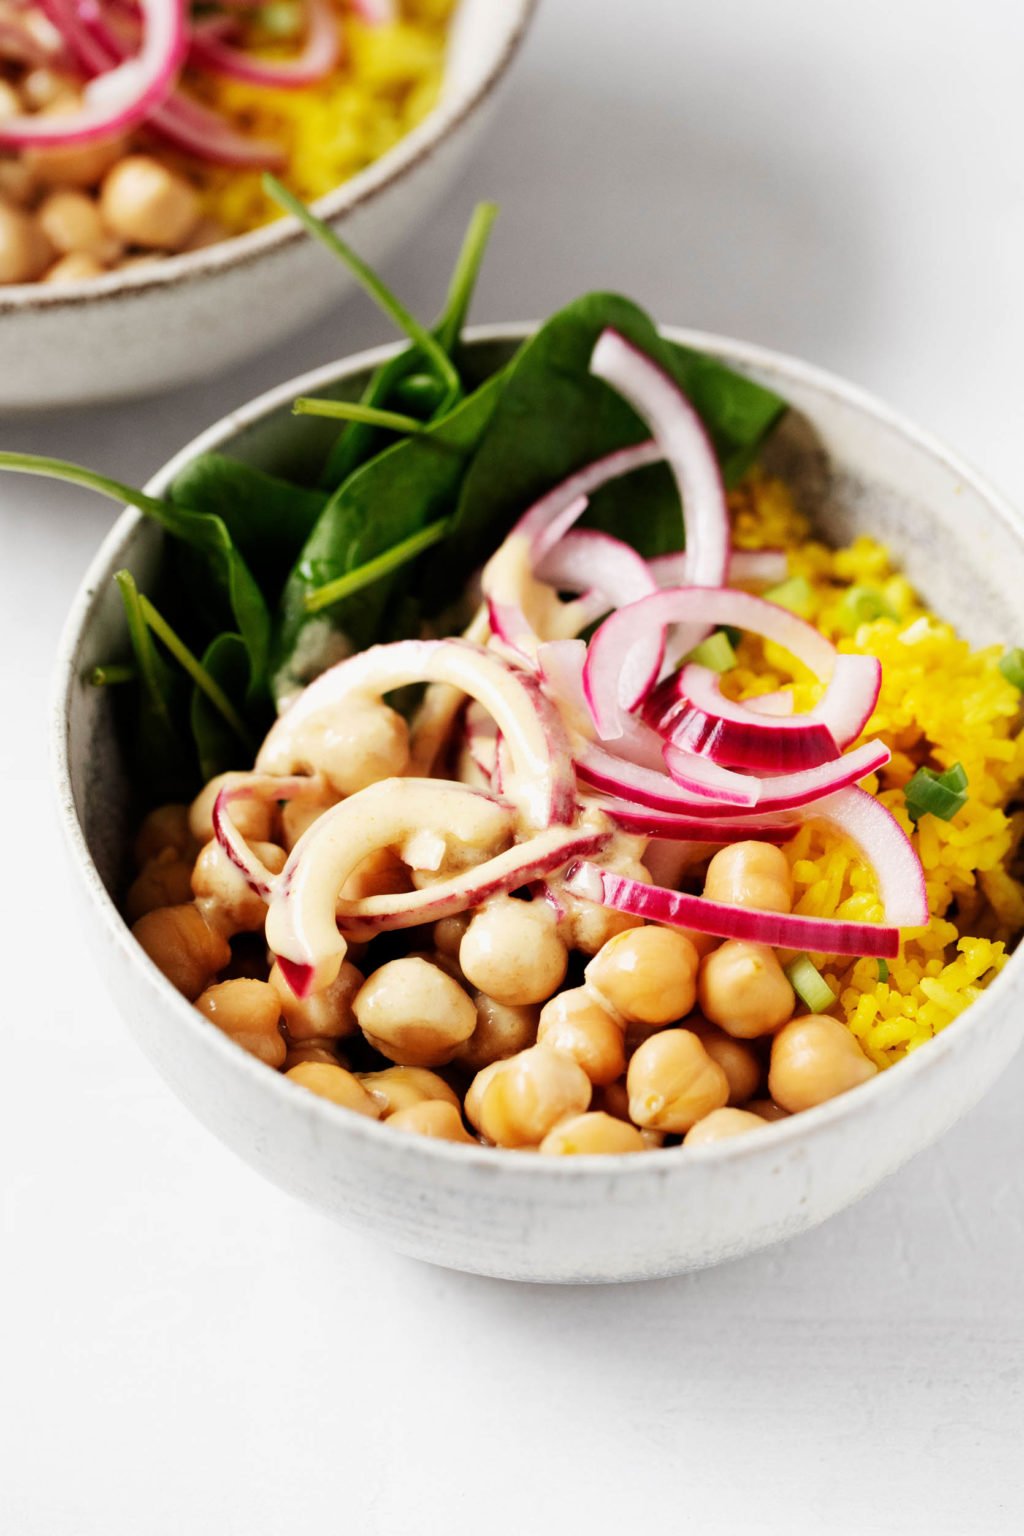 A zoomed in image of a white bowl that has been piled with spinach, onions, chickpeas, and yellow turmeric-spiced rice.